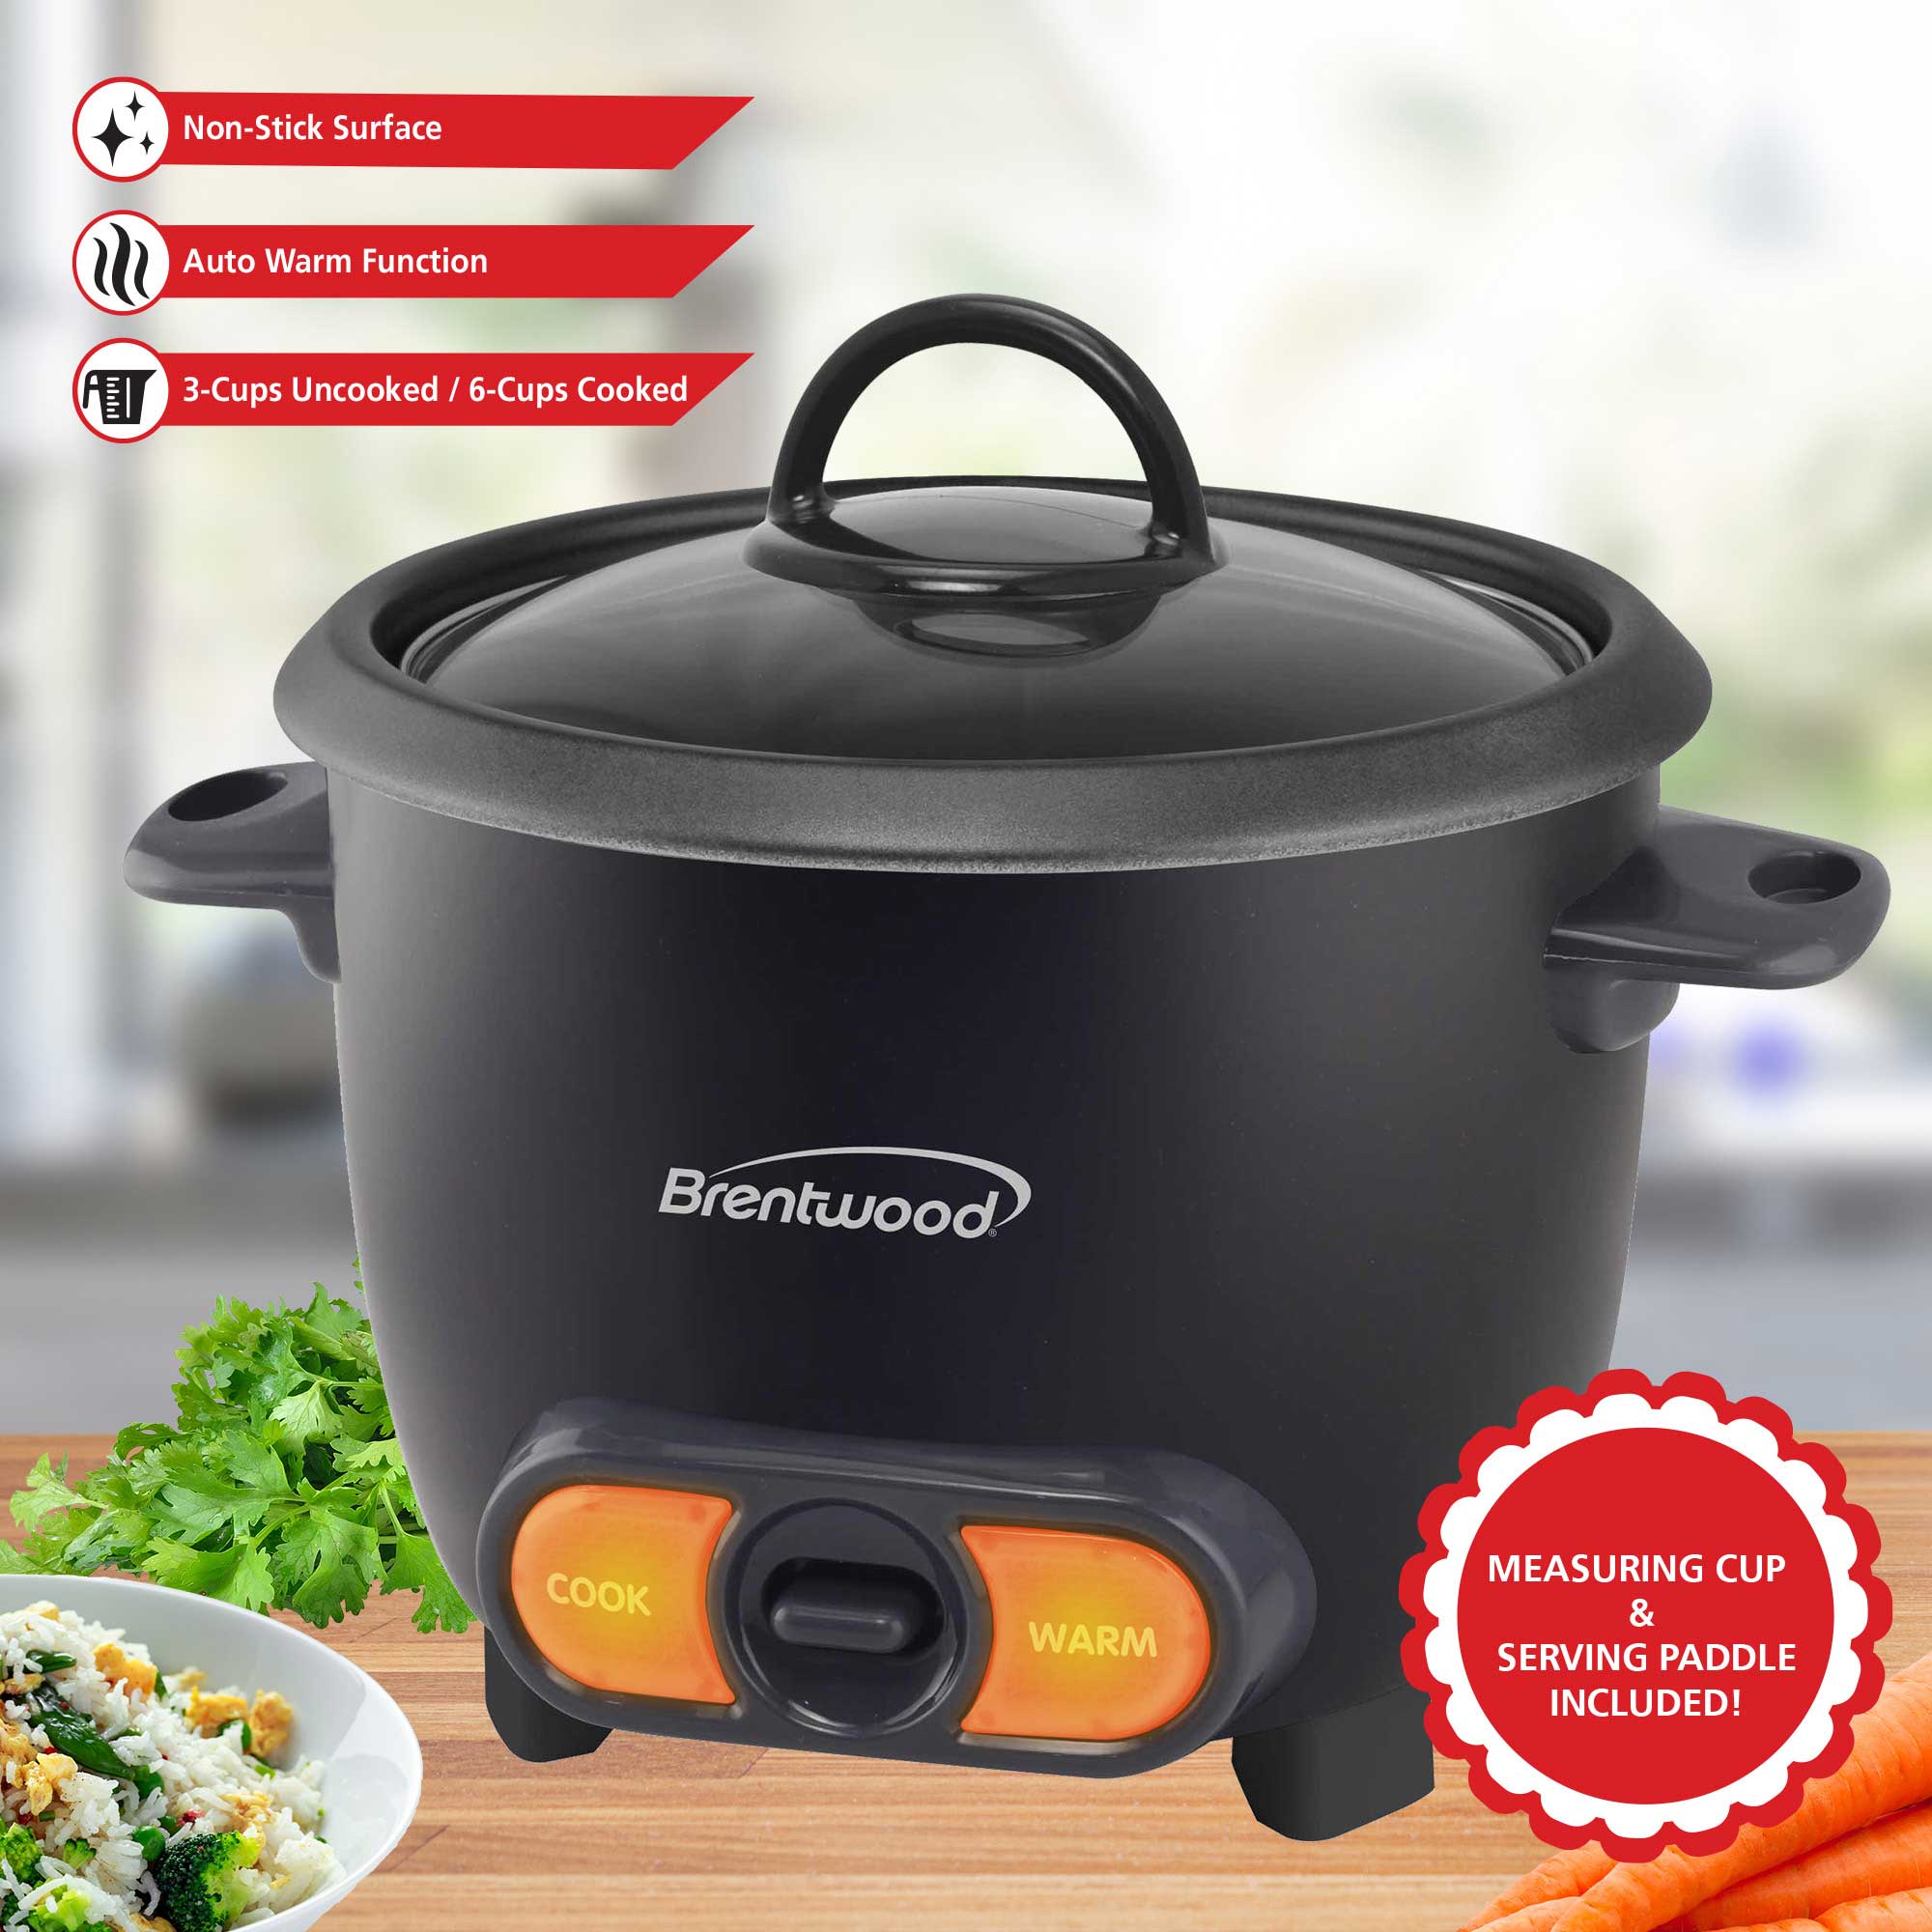 Buy Cookworks 1.5L Compact Slow Cooker - Black, Slow cookers